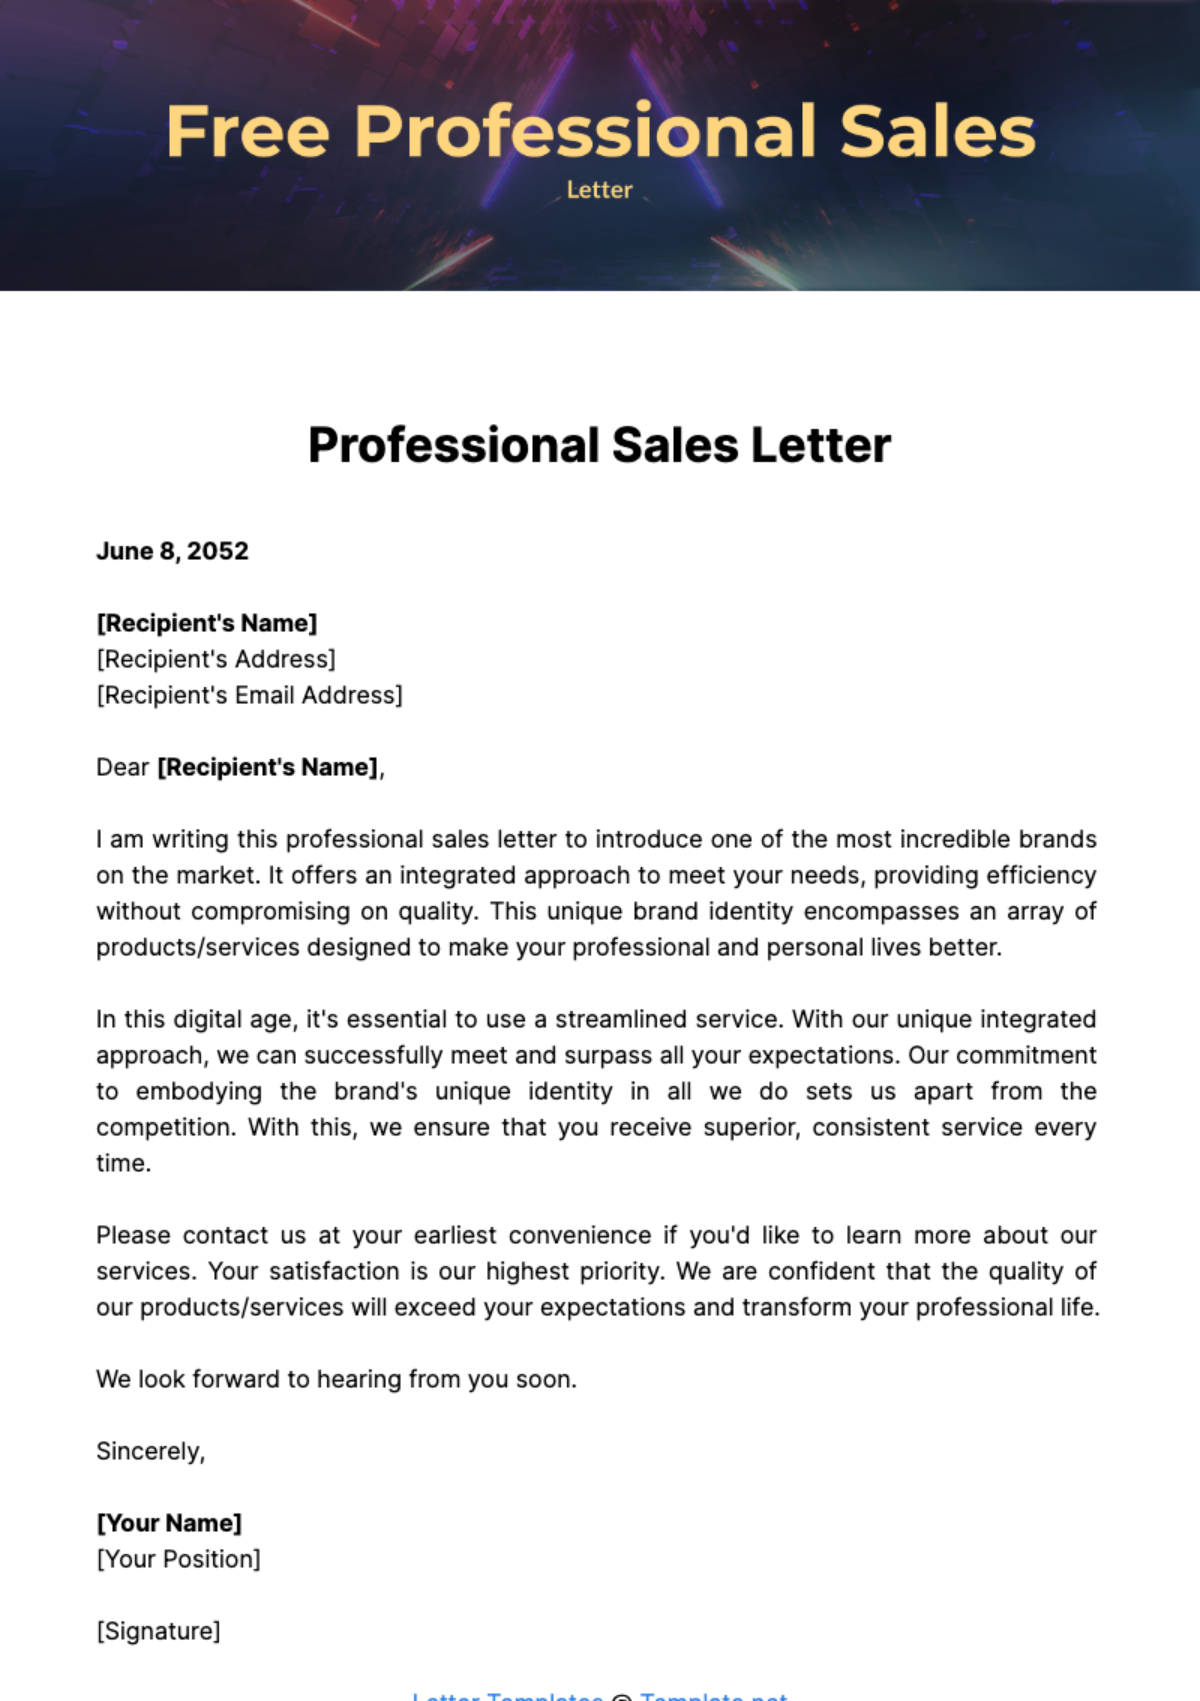 Professional Sales Letter Template